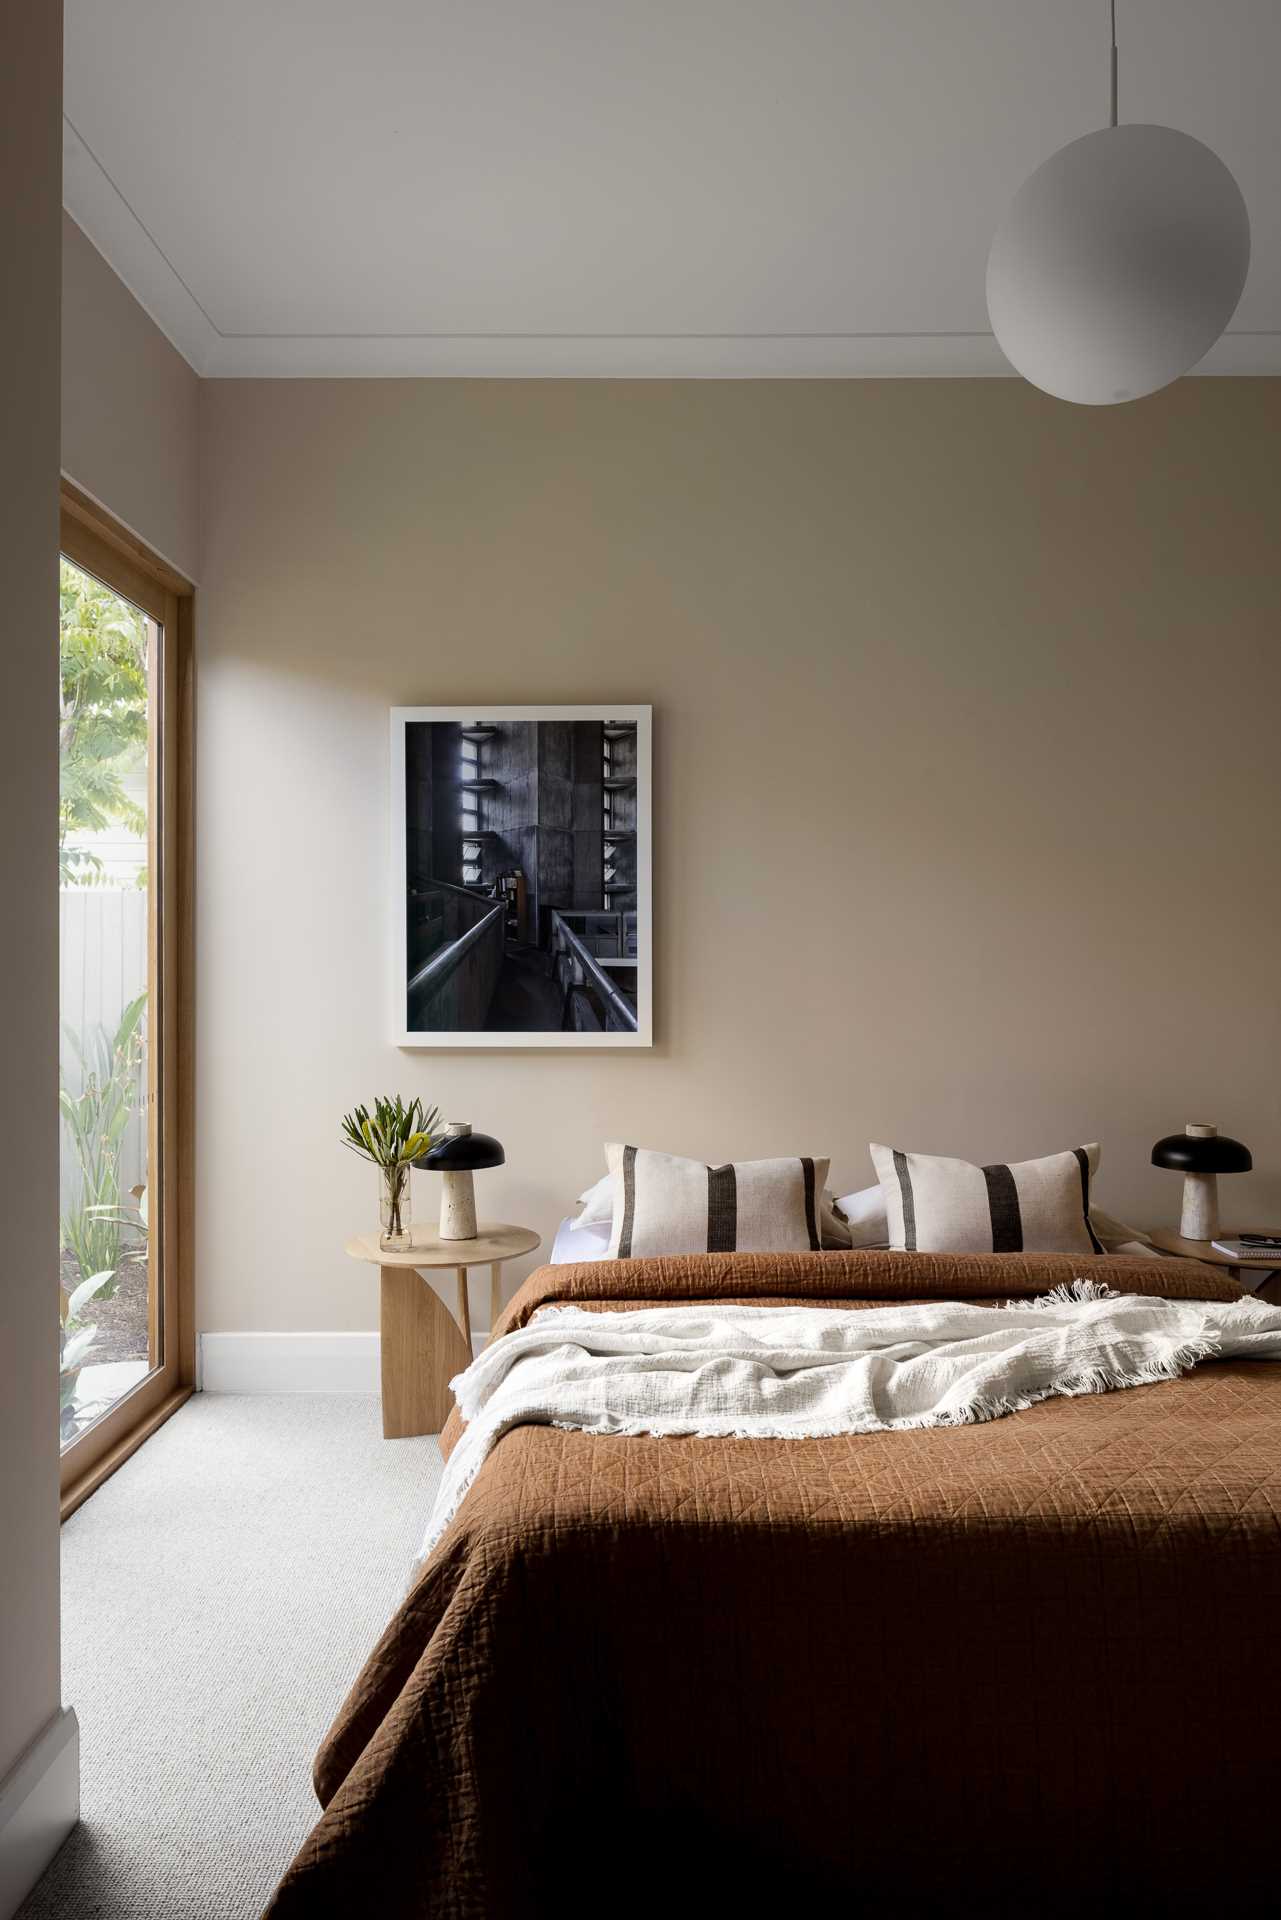 In this bedroom, which has a view of the garden, warm neutral colors have been used to create a cozy vibe.